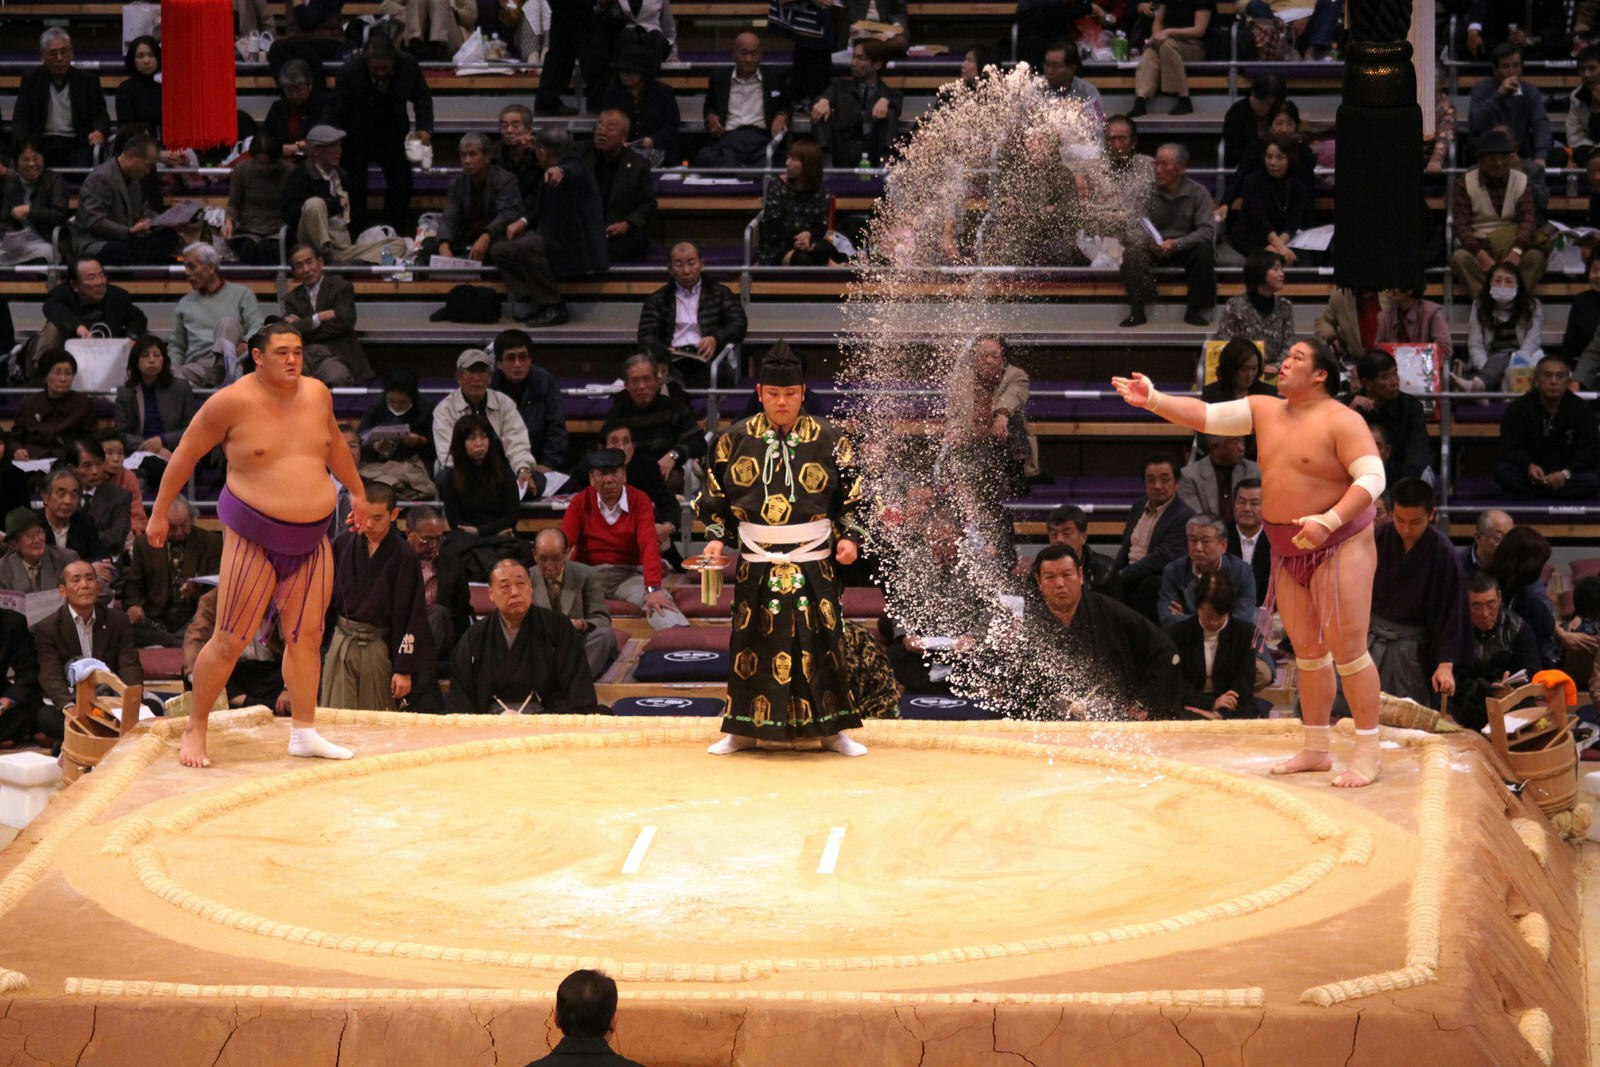 A sumo wrestler throws a large handful of salt across the sumo ring